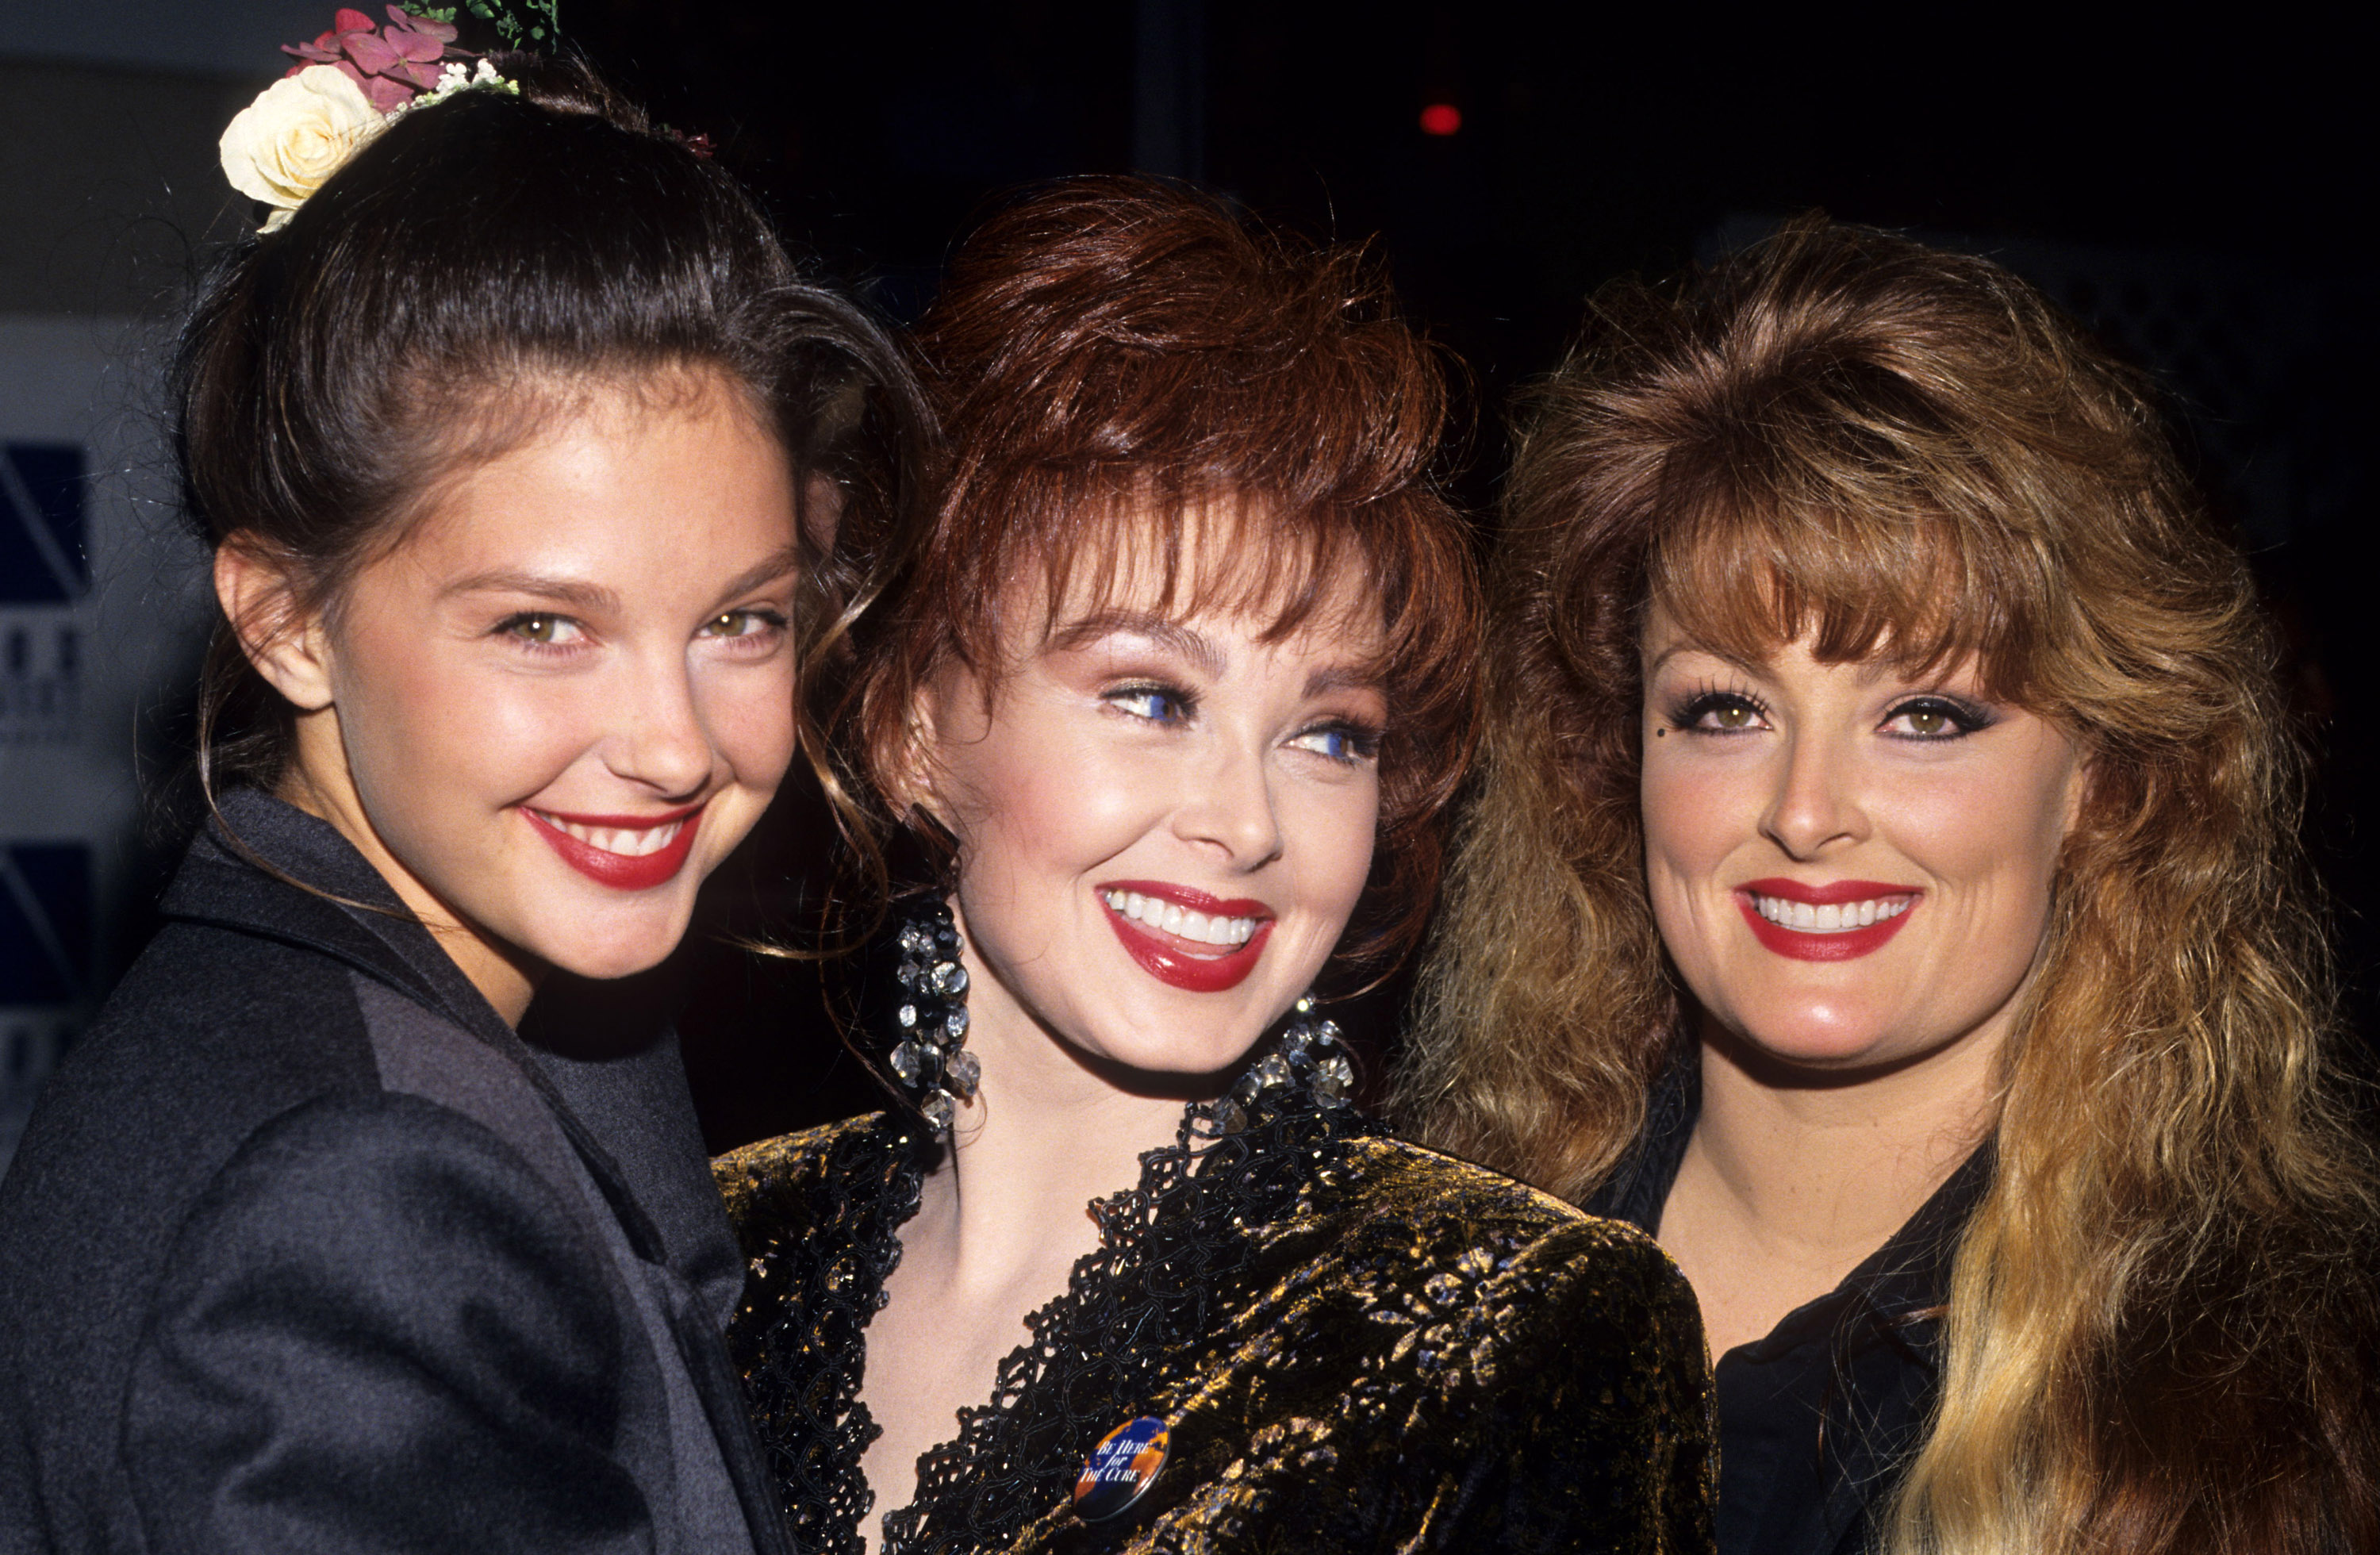 Ashley, Wynonna, and Naomi Judd at the APLA 6th Commitment to Life Concert Benefit | Source: Getty Images